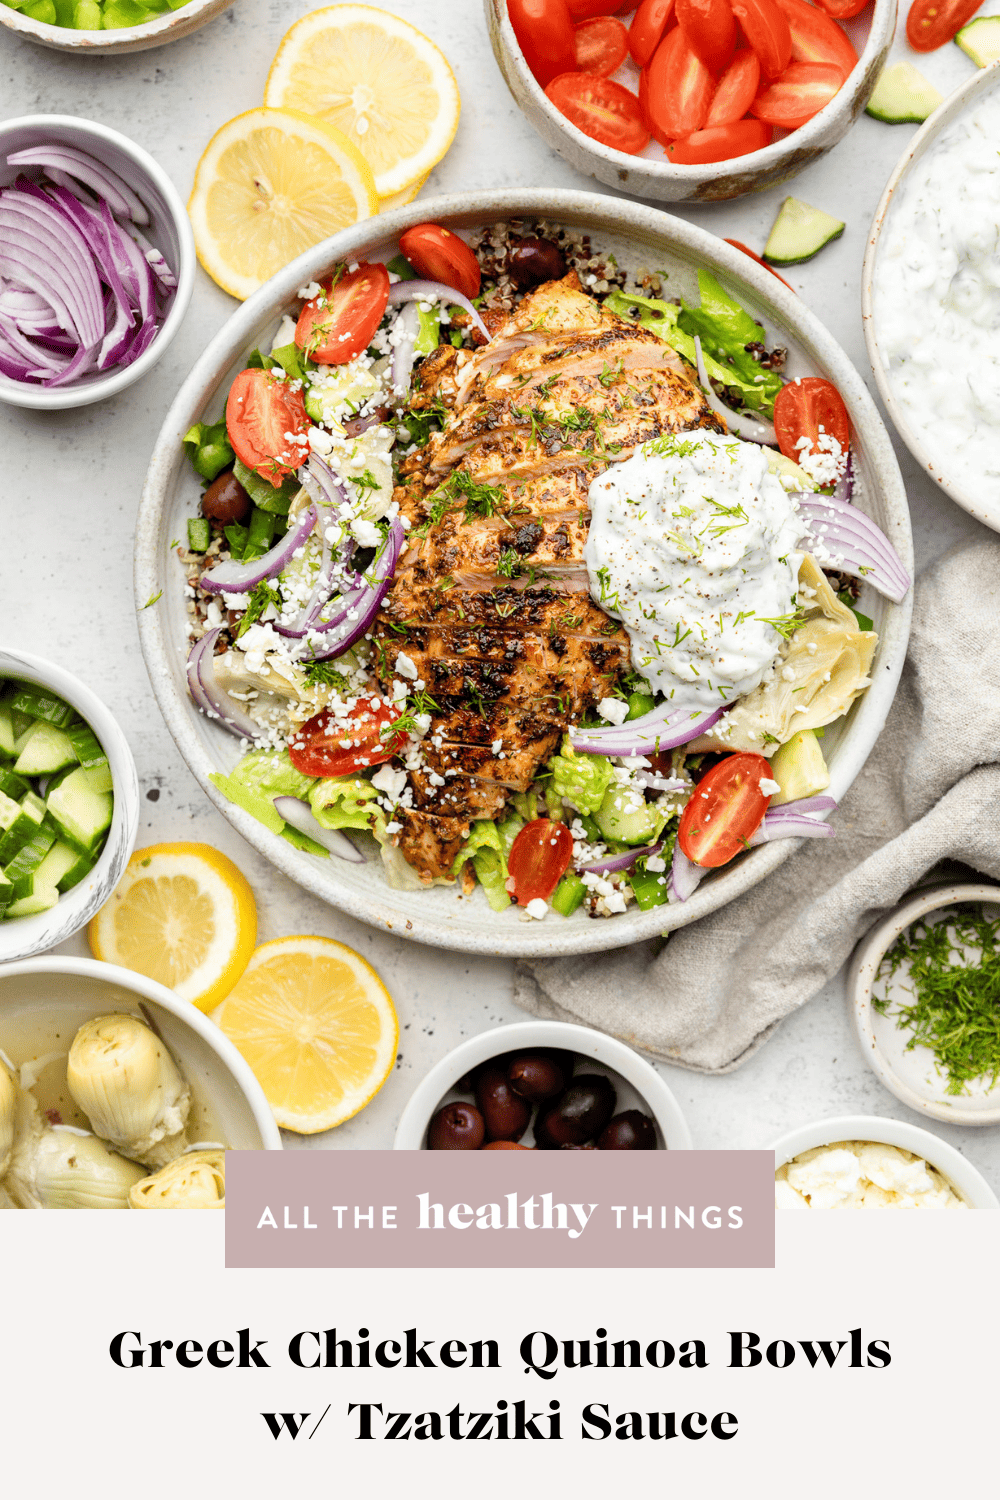 Greek Chicken Bowl - All the Healthy Things